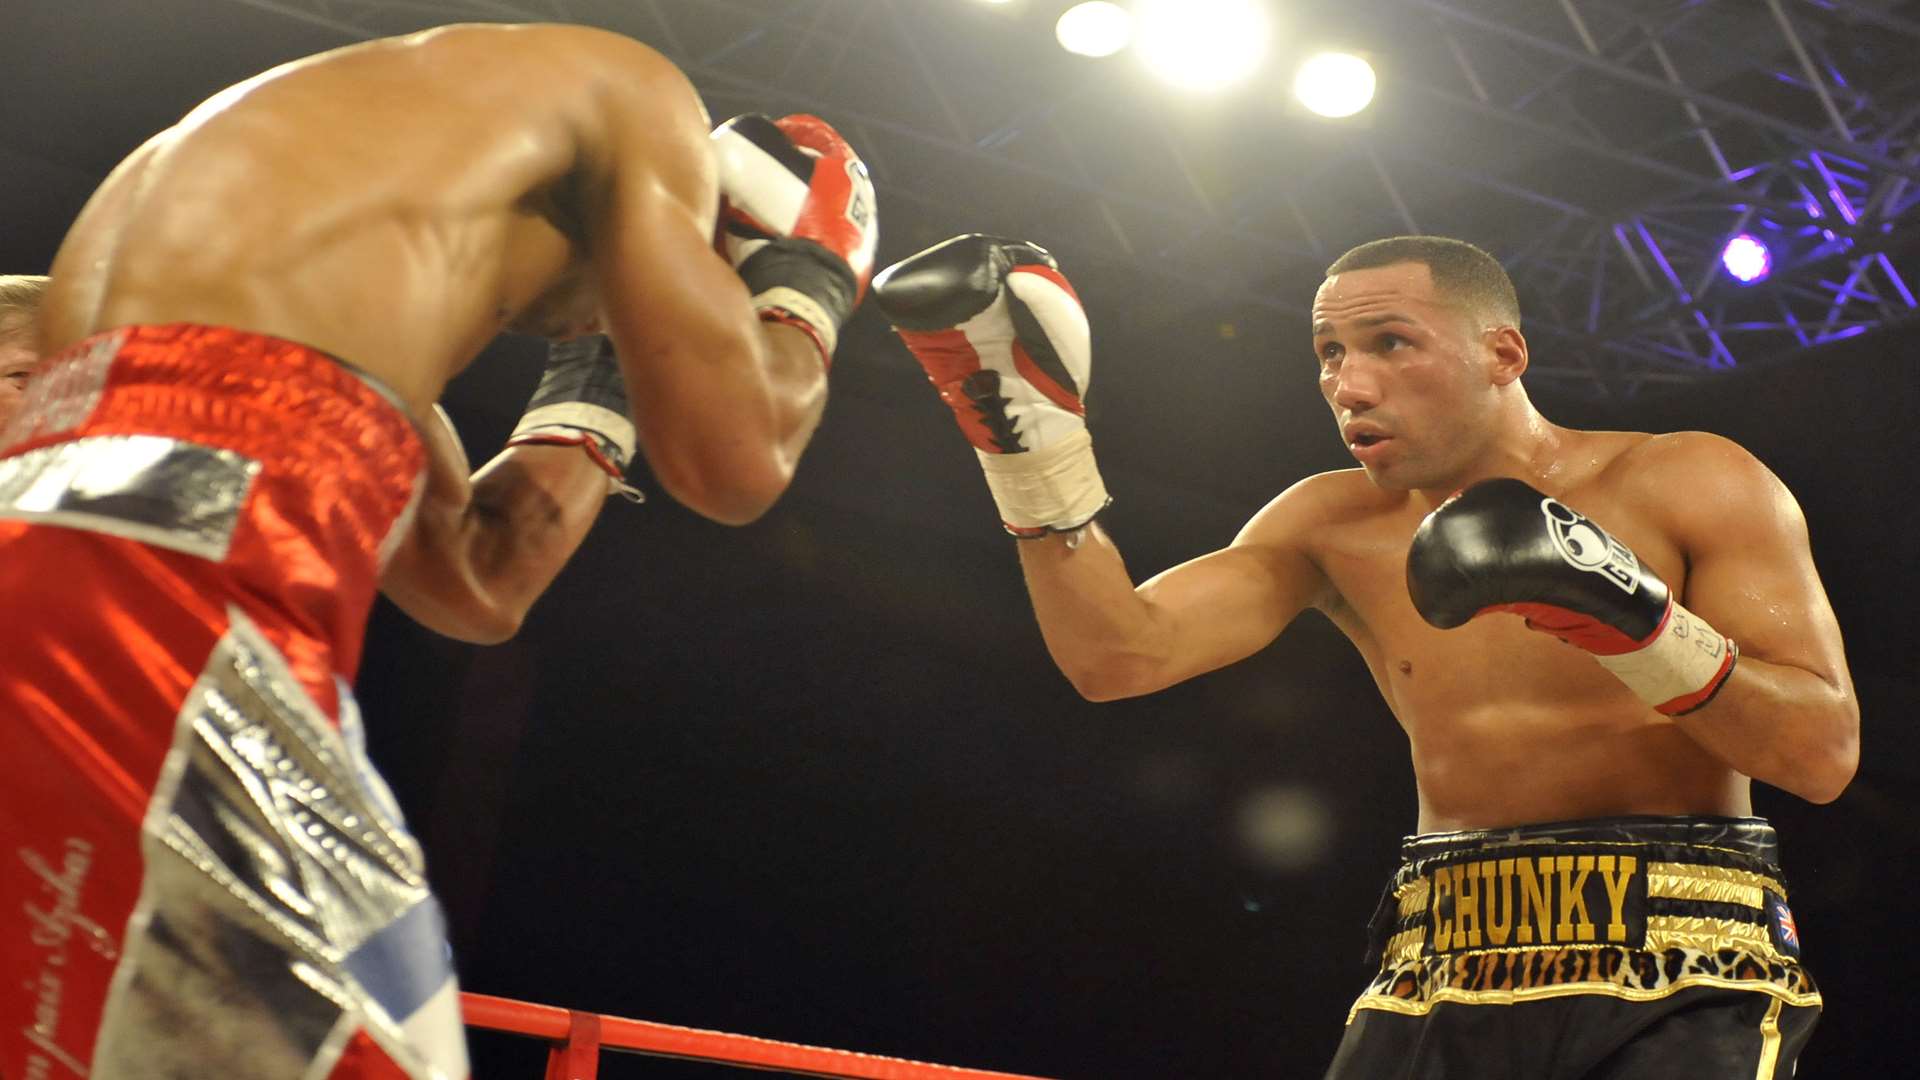 James DeGale defends his European Super Middleweight Champion crown at Glow in Bluewater